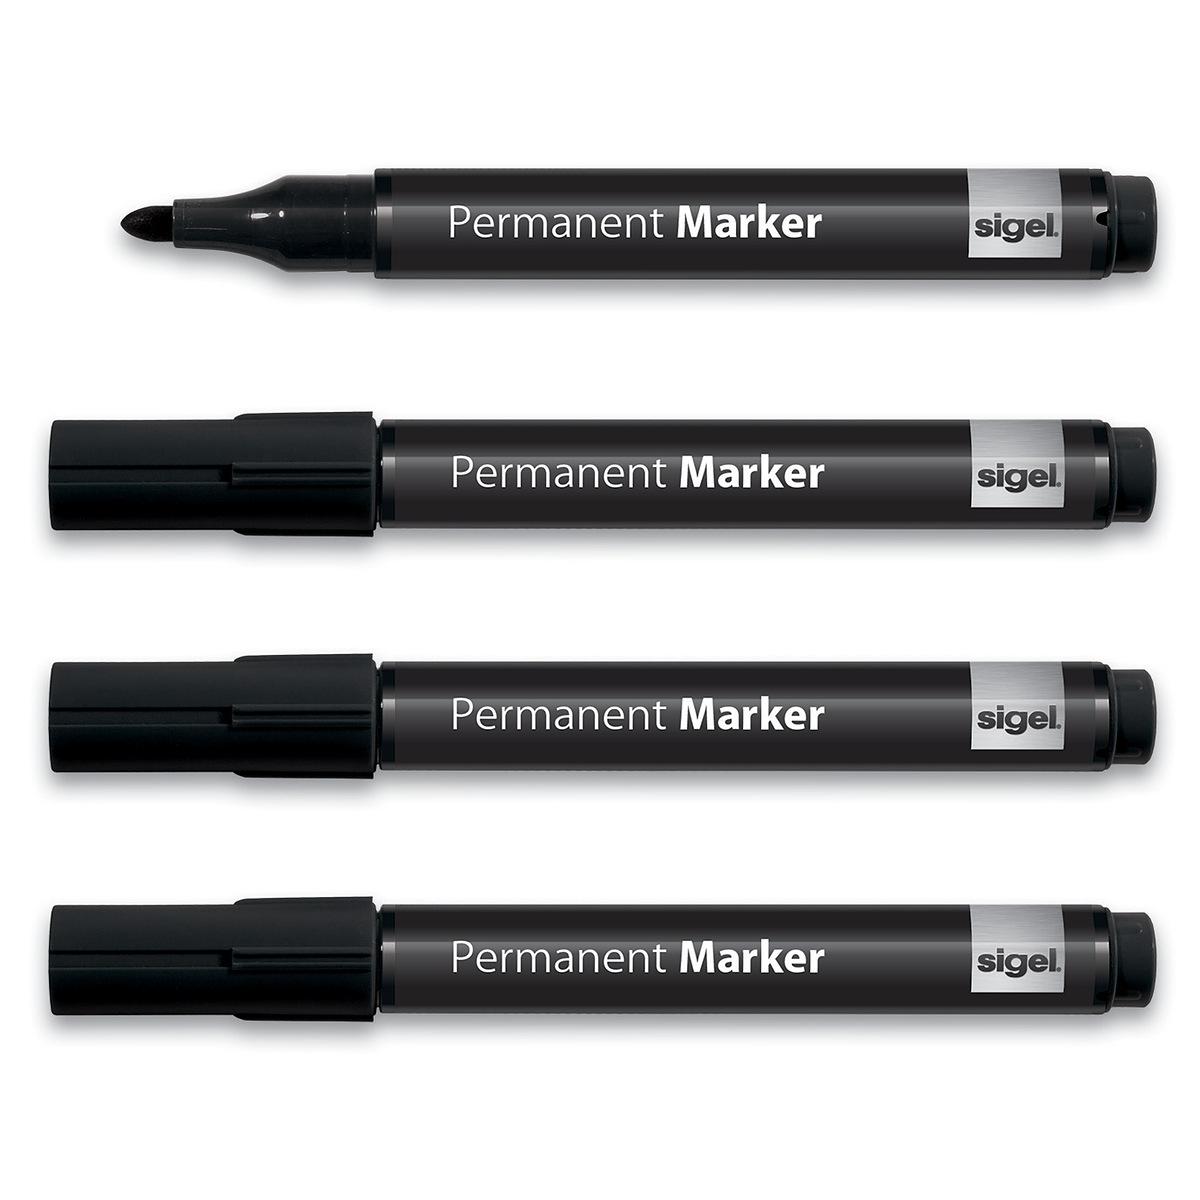 theorie Rally Anekdote Permanent markers | SIGEL